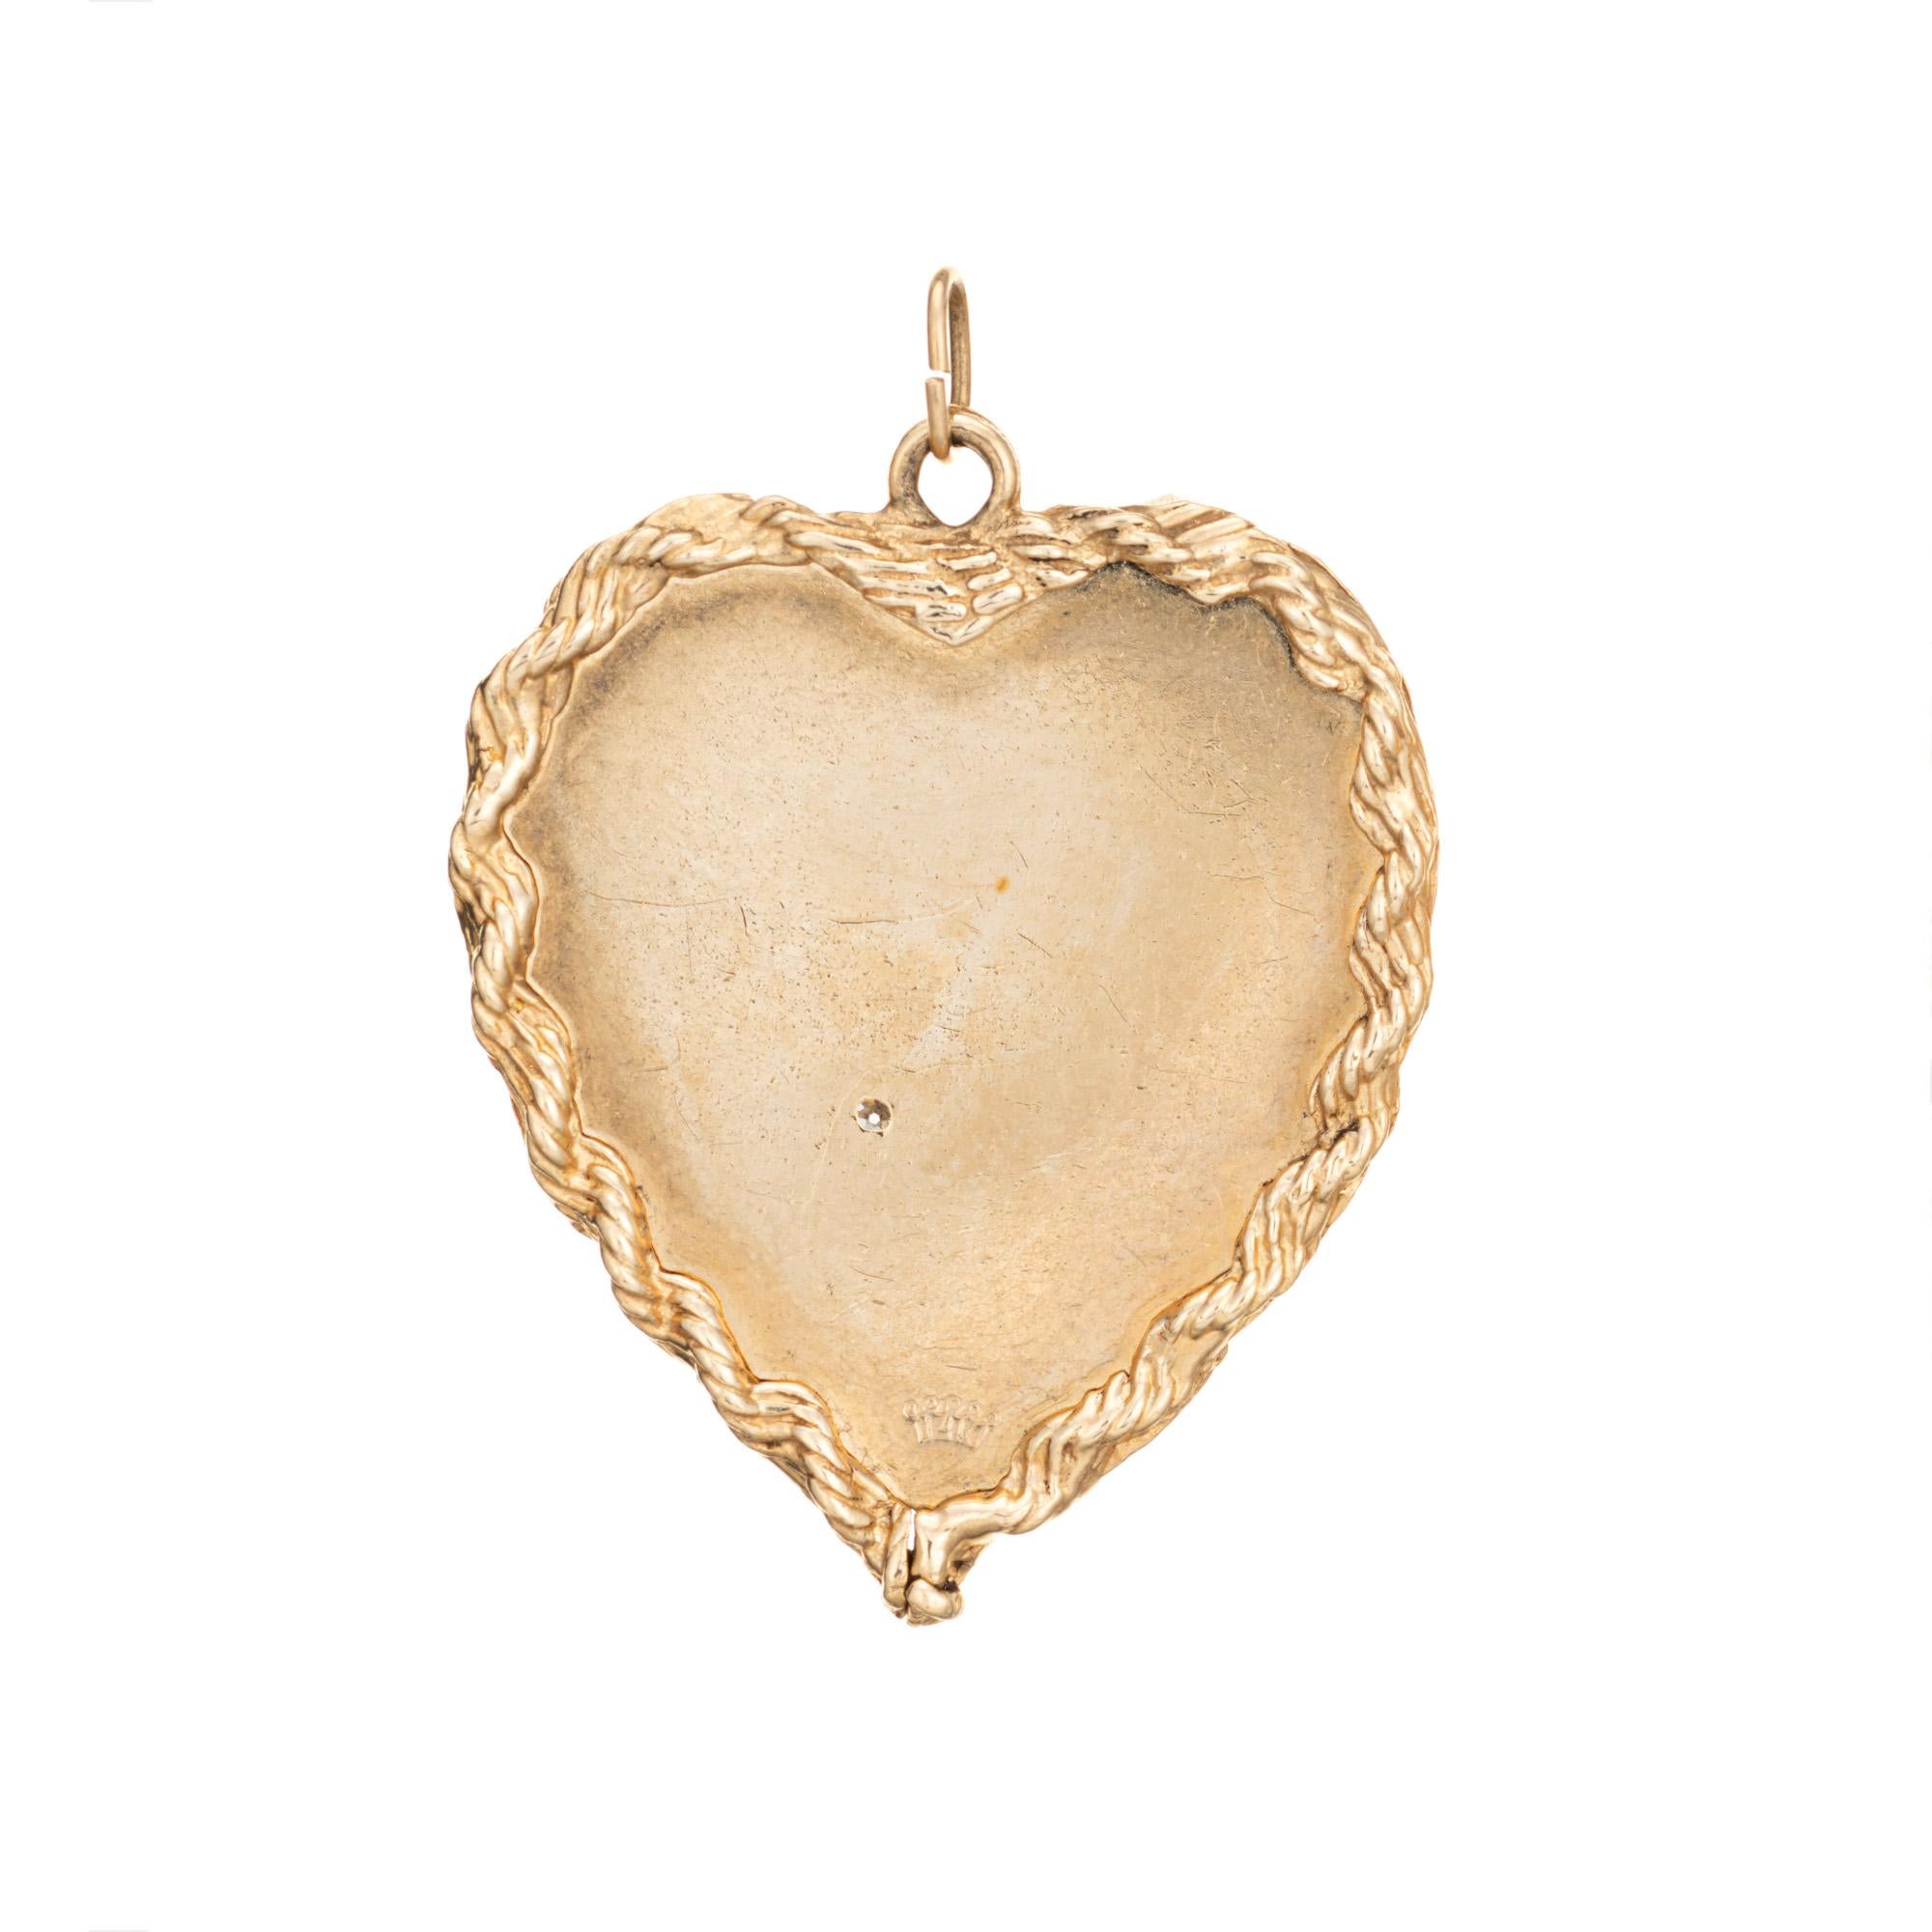 Finely detailed vintage large heart charm crafted in 14k yellow gold (circa 1966).  

One estimated 0.01 carat diamond is set into the charm (estimated at H-I color and SI1 clarity).

If your birthday happens to be June 30th, 1966, you are in luck!